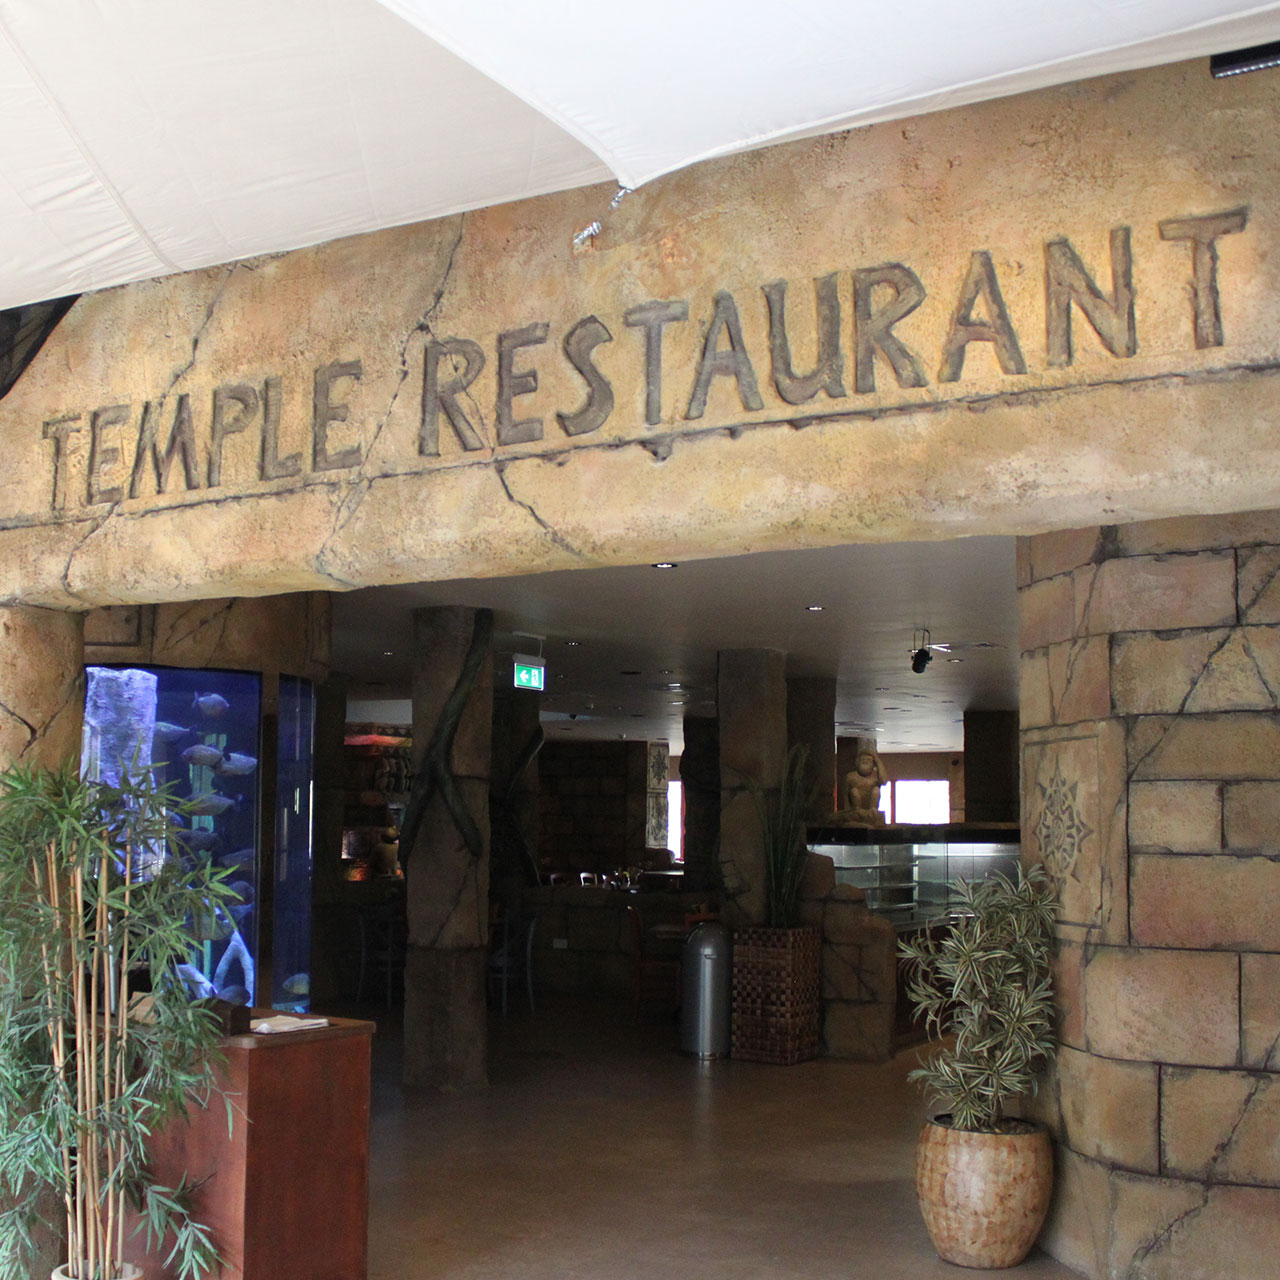 Temple Restaurant & Bar Page Icon Image